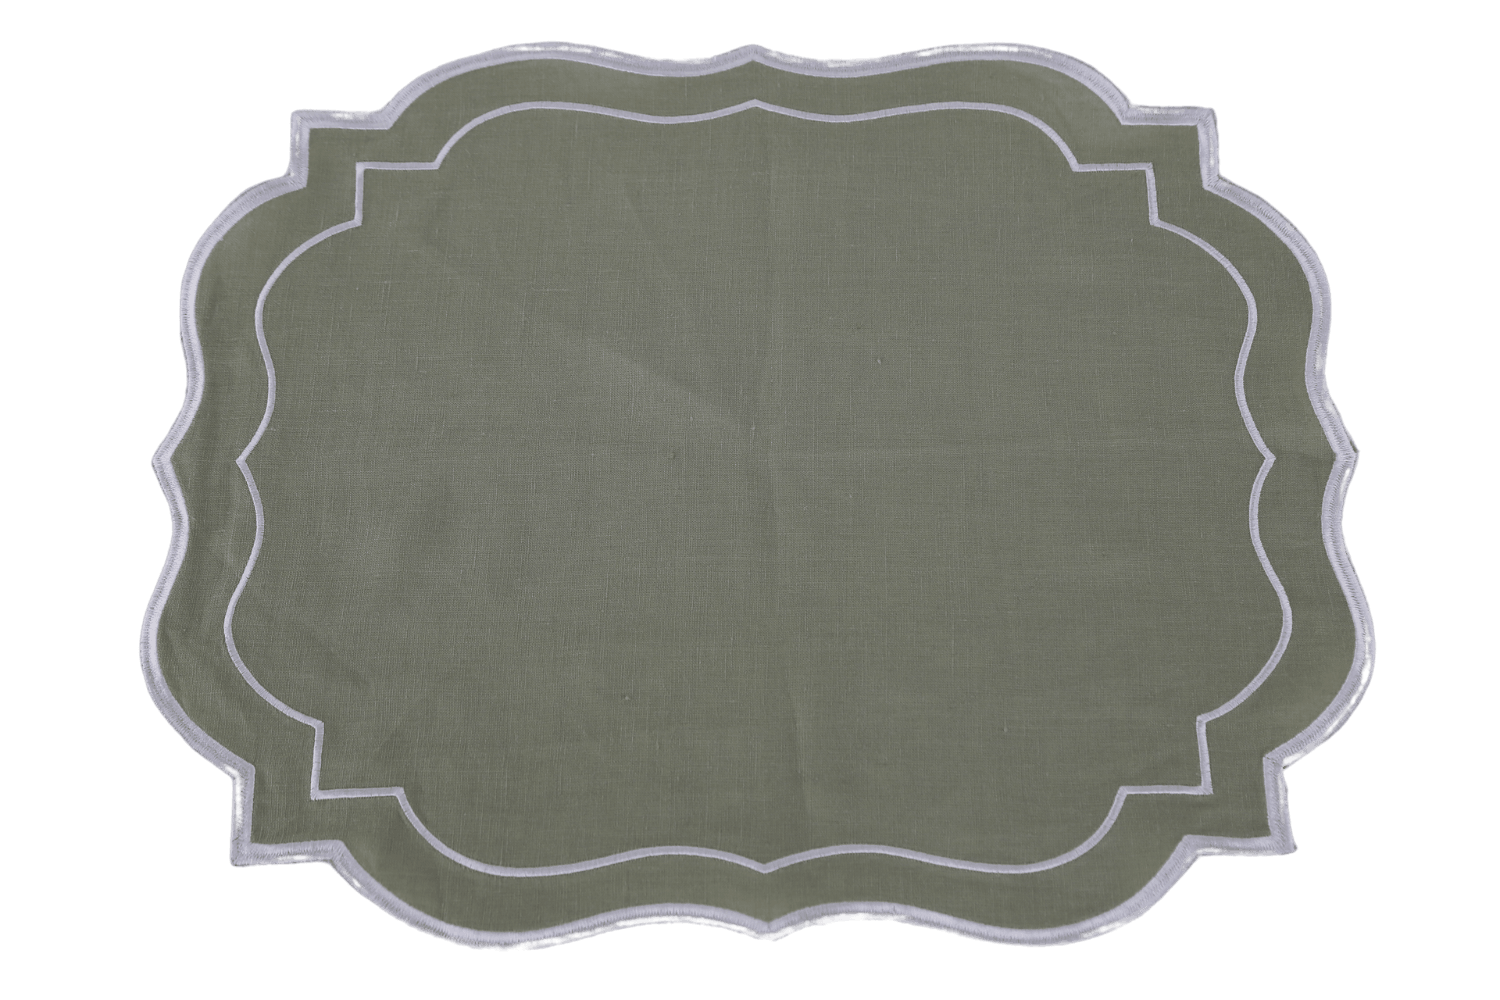 Scalloped linen placemats, set of 4, perfect for elegant table setups. Made with premium flax linen for a luxurious feel. Ironing suggested prior to use. 38 x 38cm.